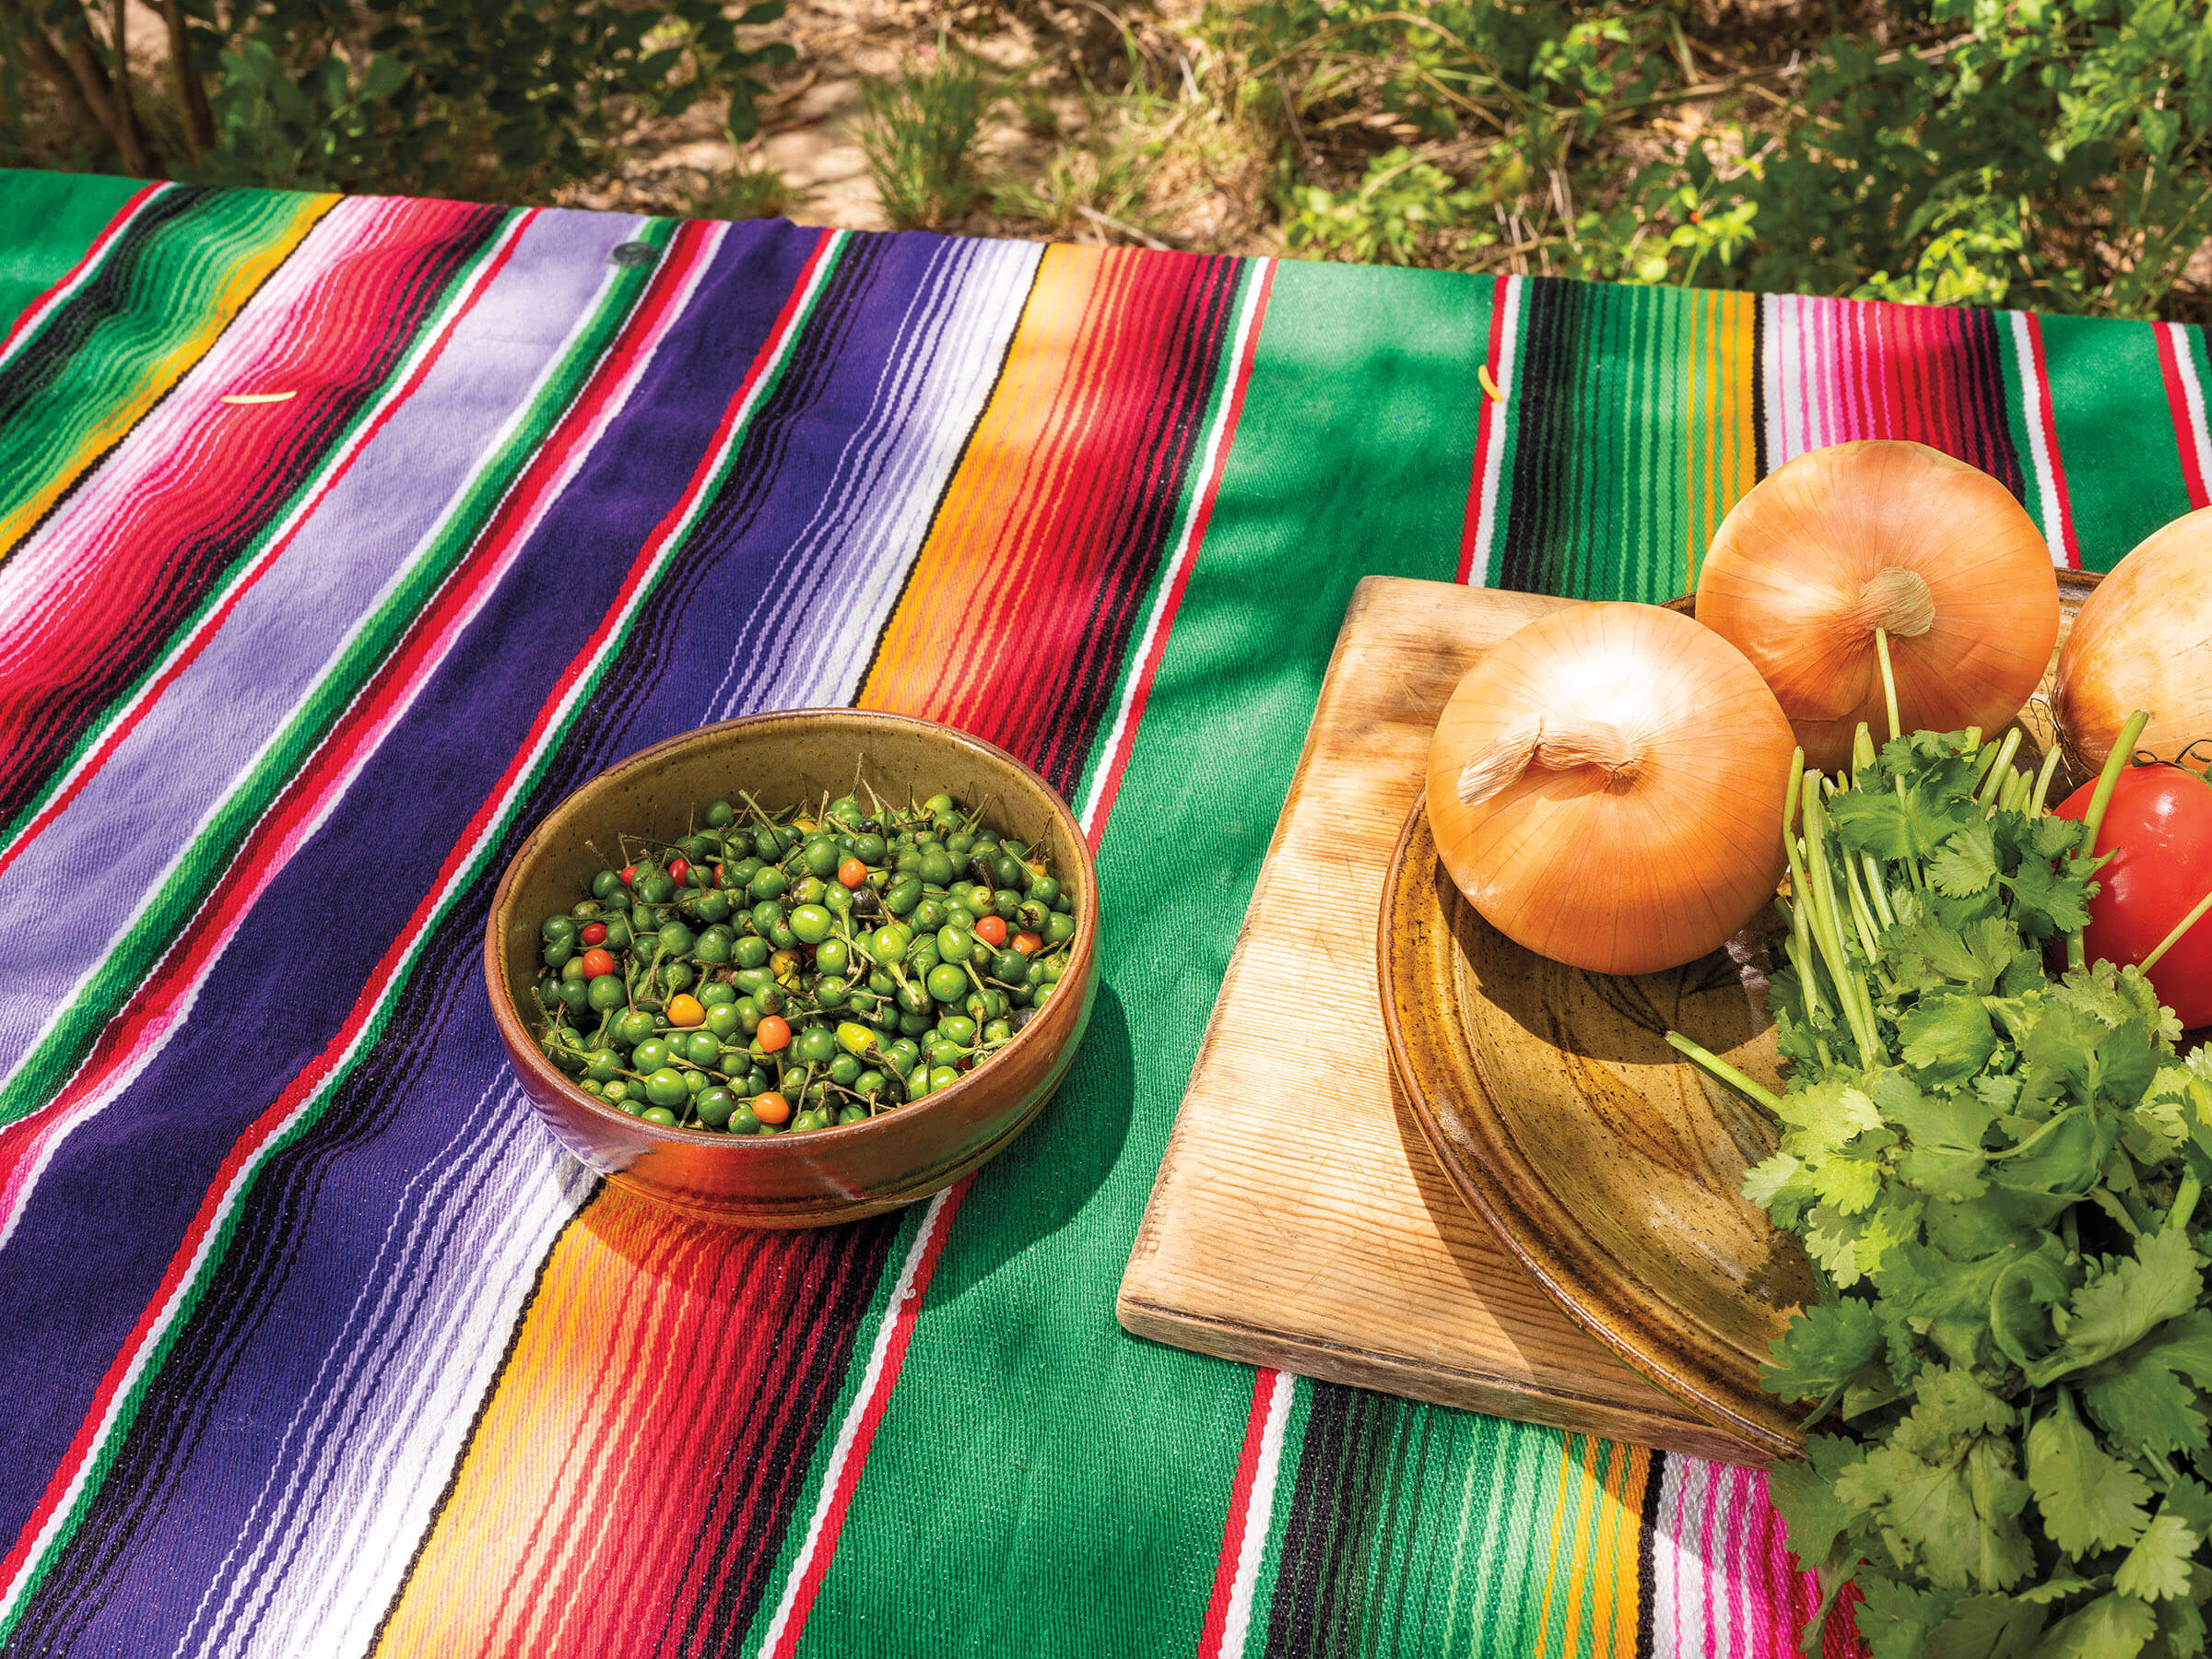 A bowl of red and green chili pequin on a colorful Serape style blanket